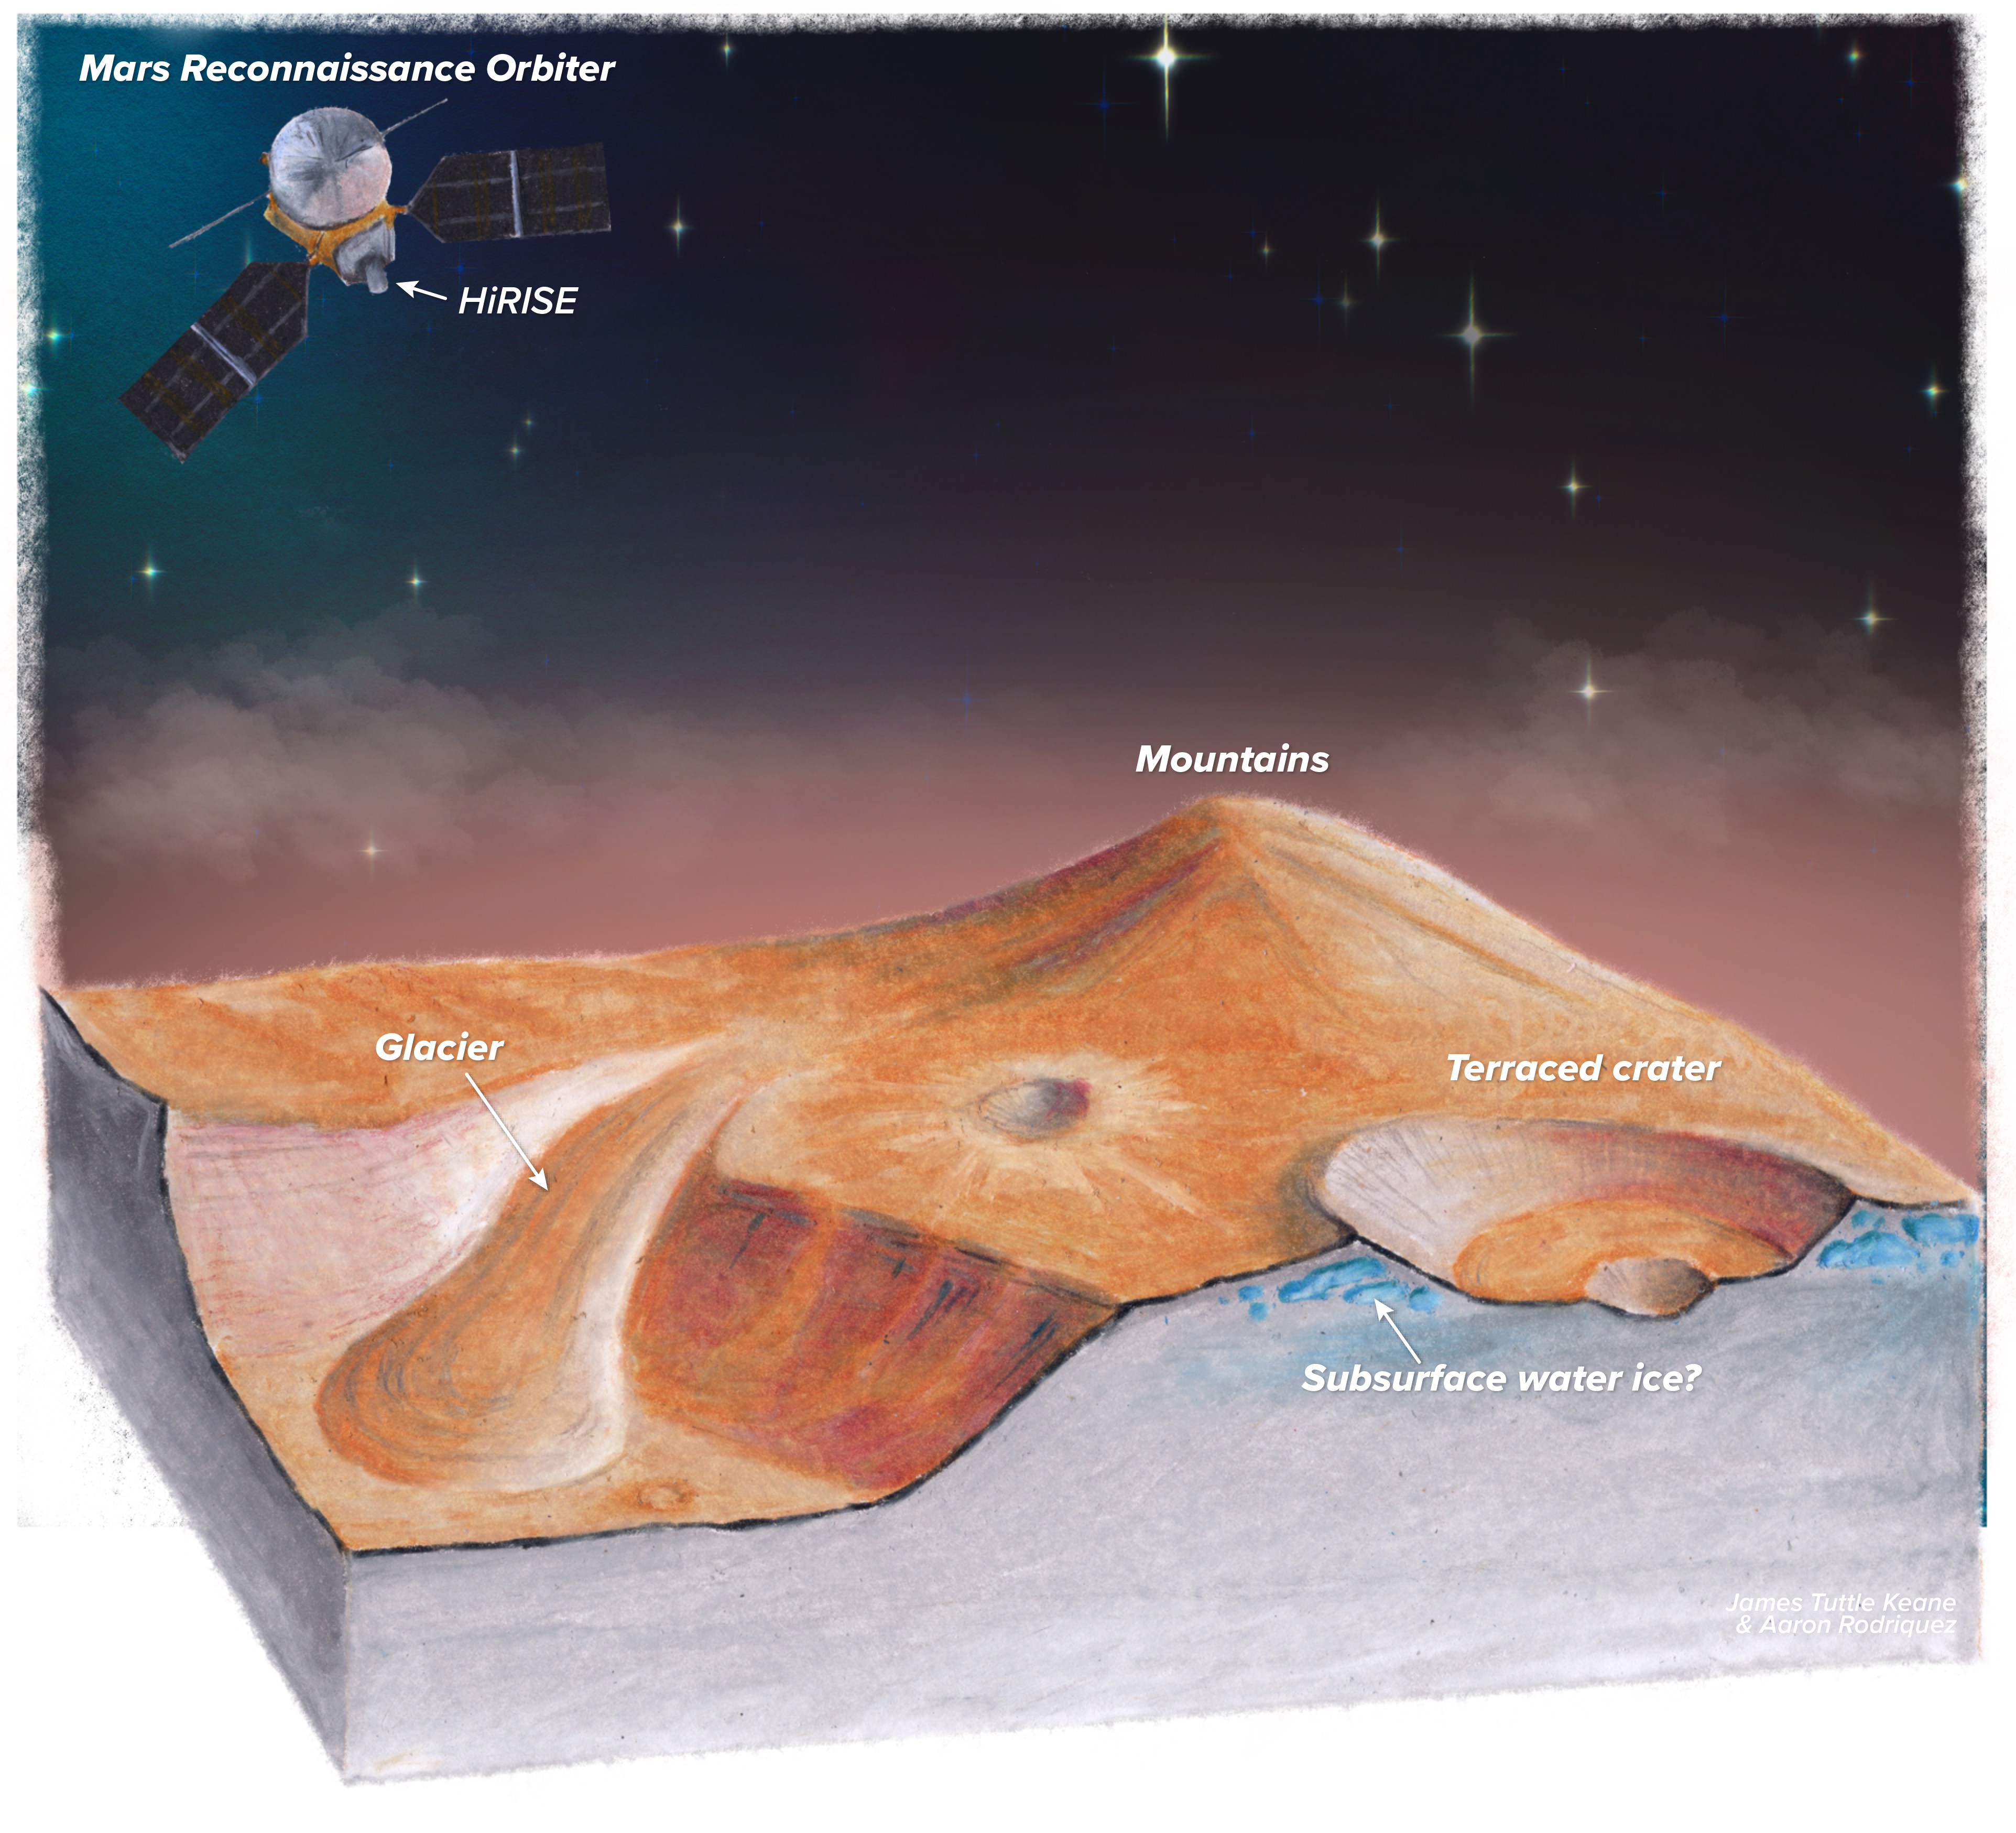 Illustration of Mars surface features: glacier, mountains and a terraced crater with a cross section showing possible subsurface water ice.